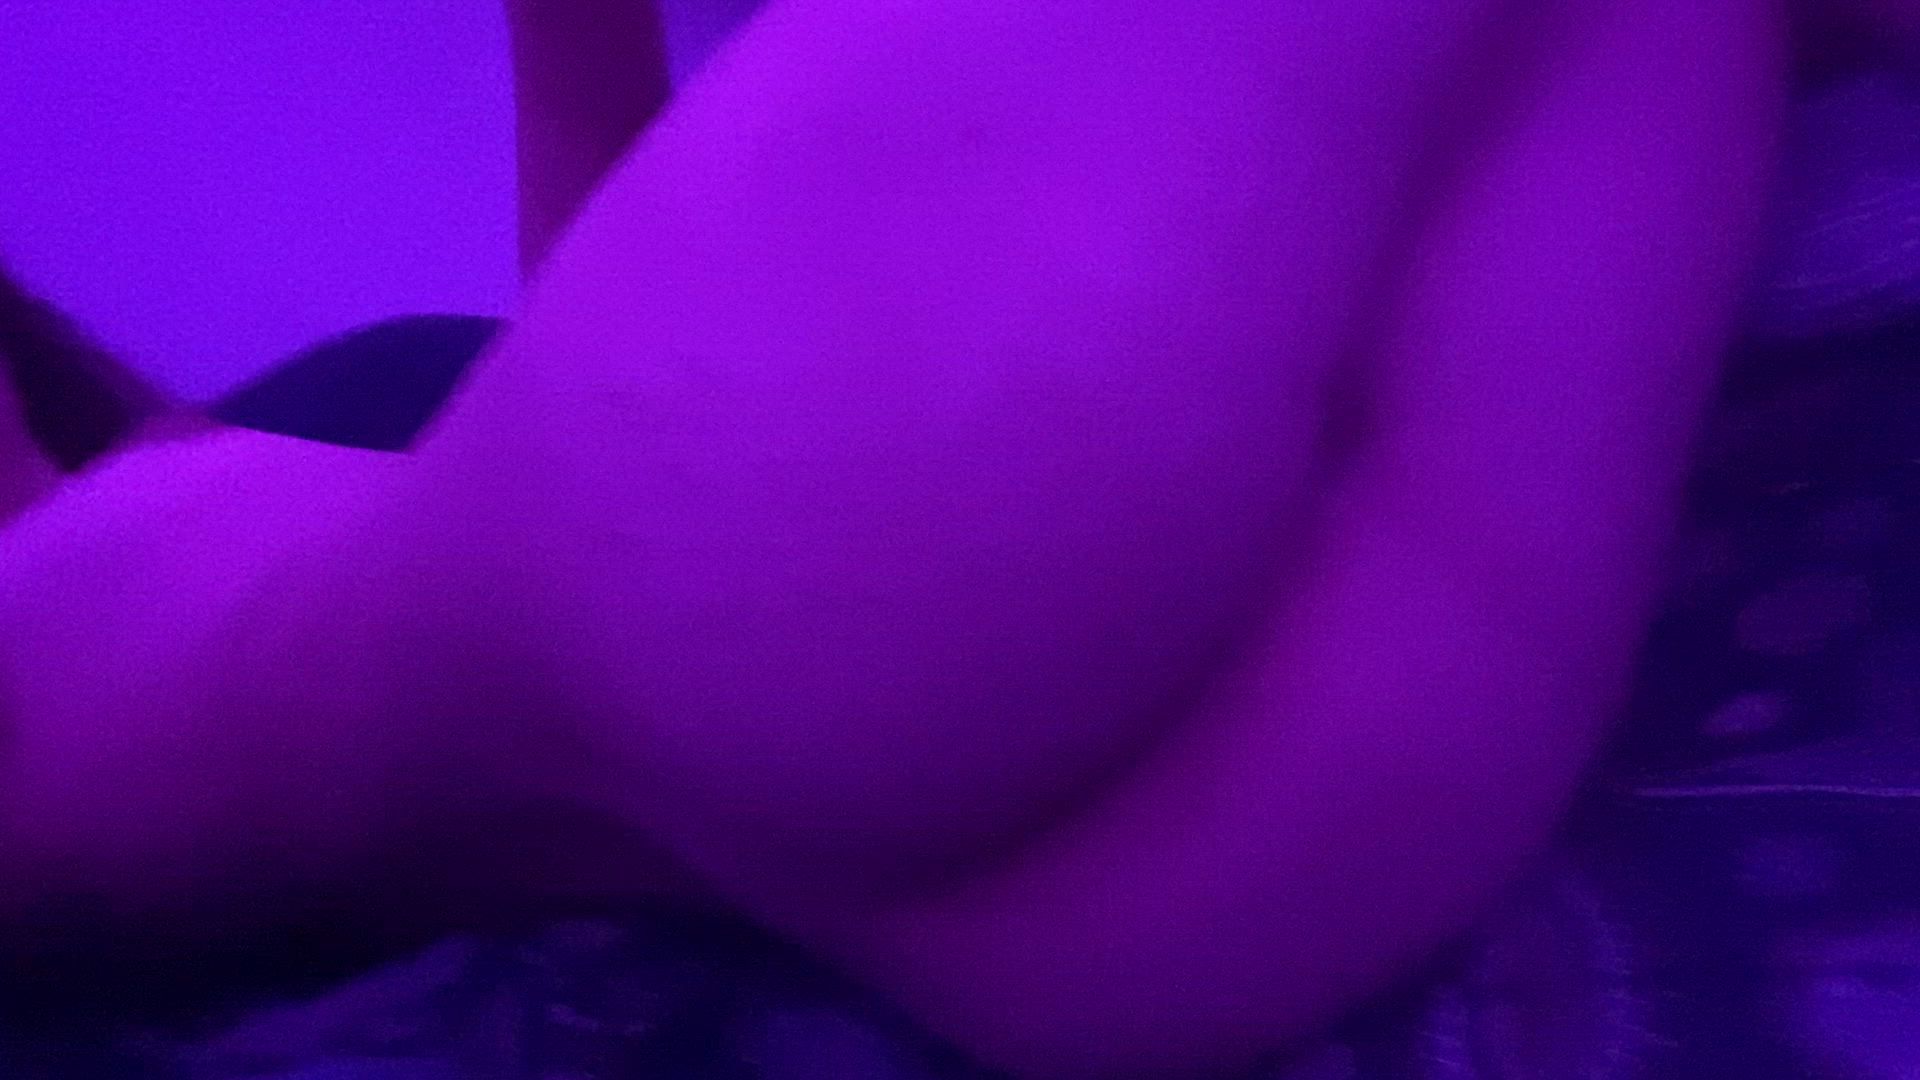 Ass porn video with onlyfans model Alice <strong>@ace_the_notable.</strong>